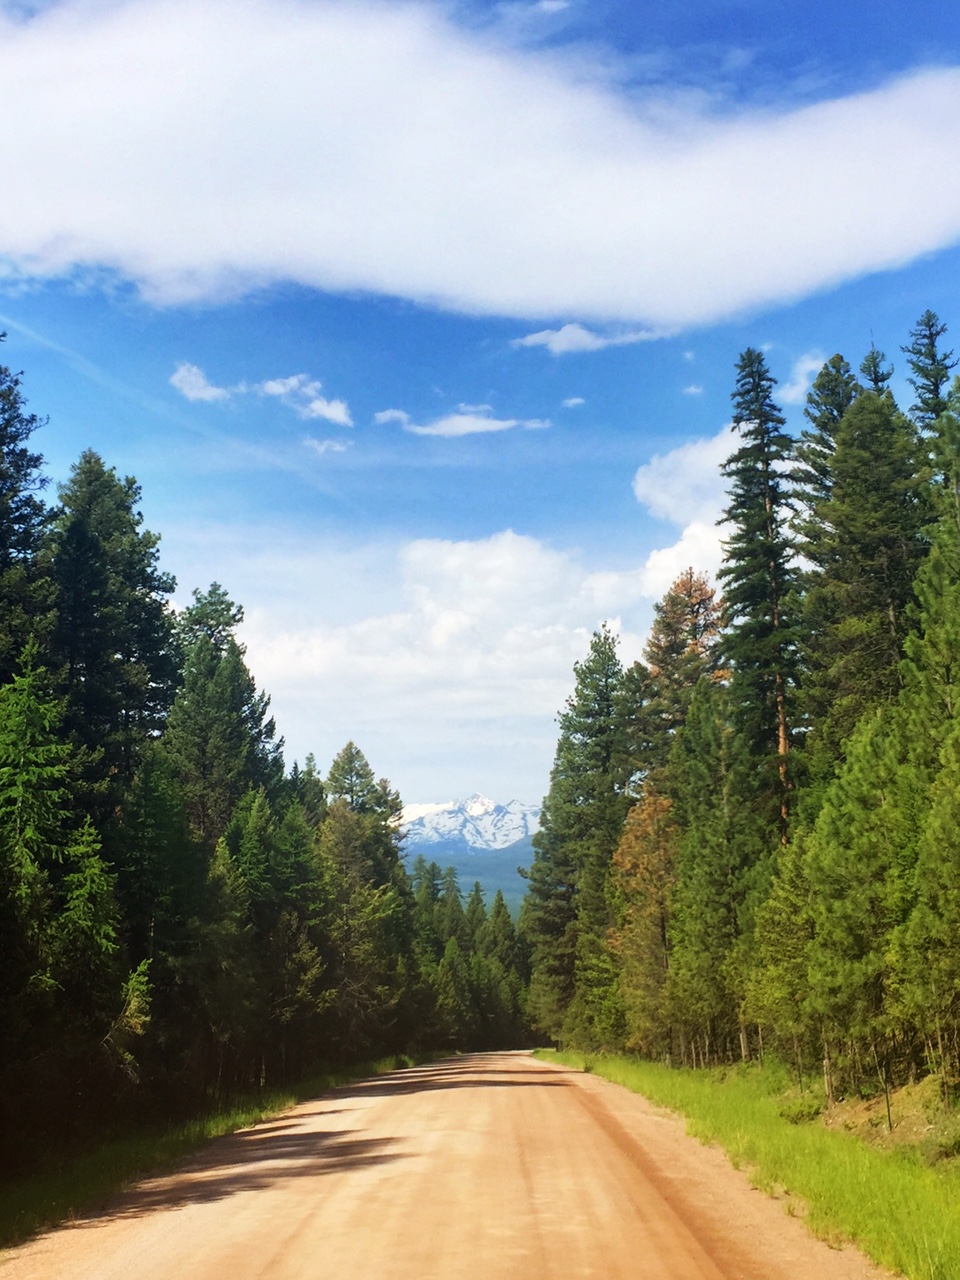 25 Photos from Summer in Montana | The Official Western Montana Travel